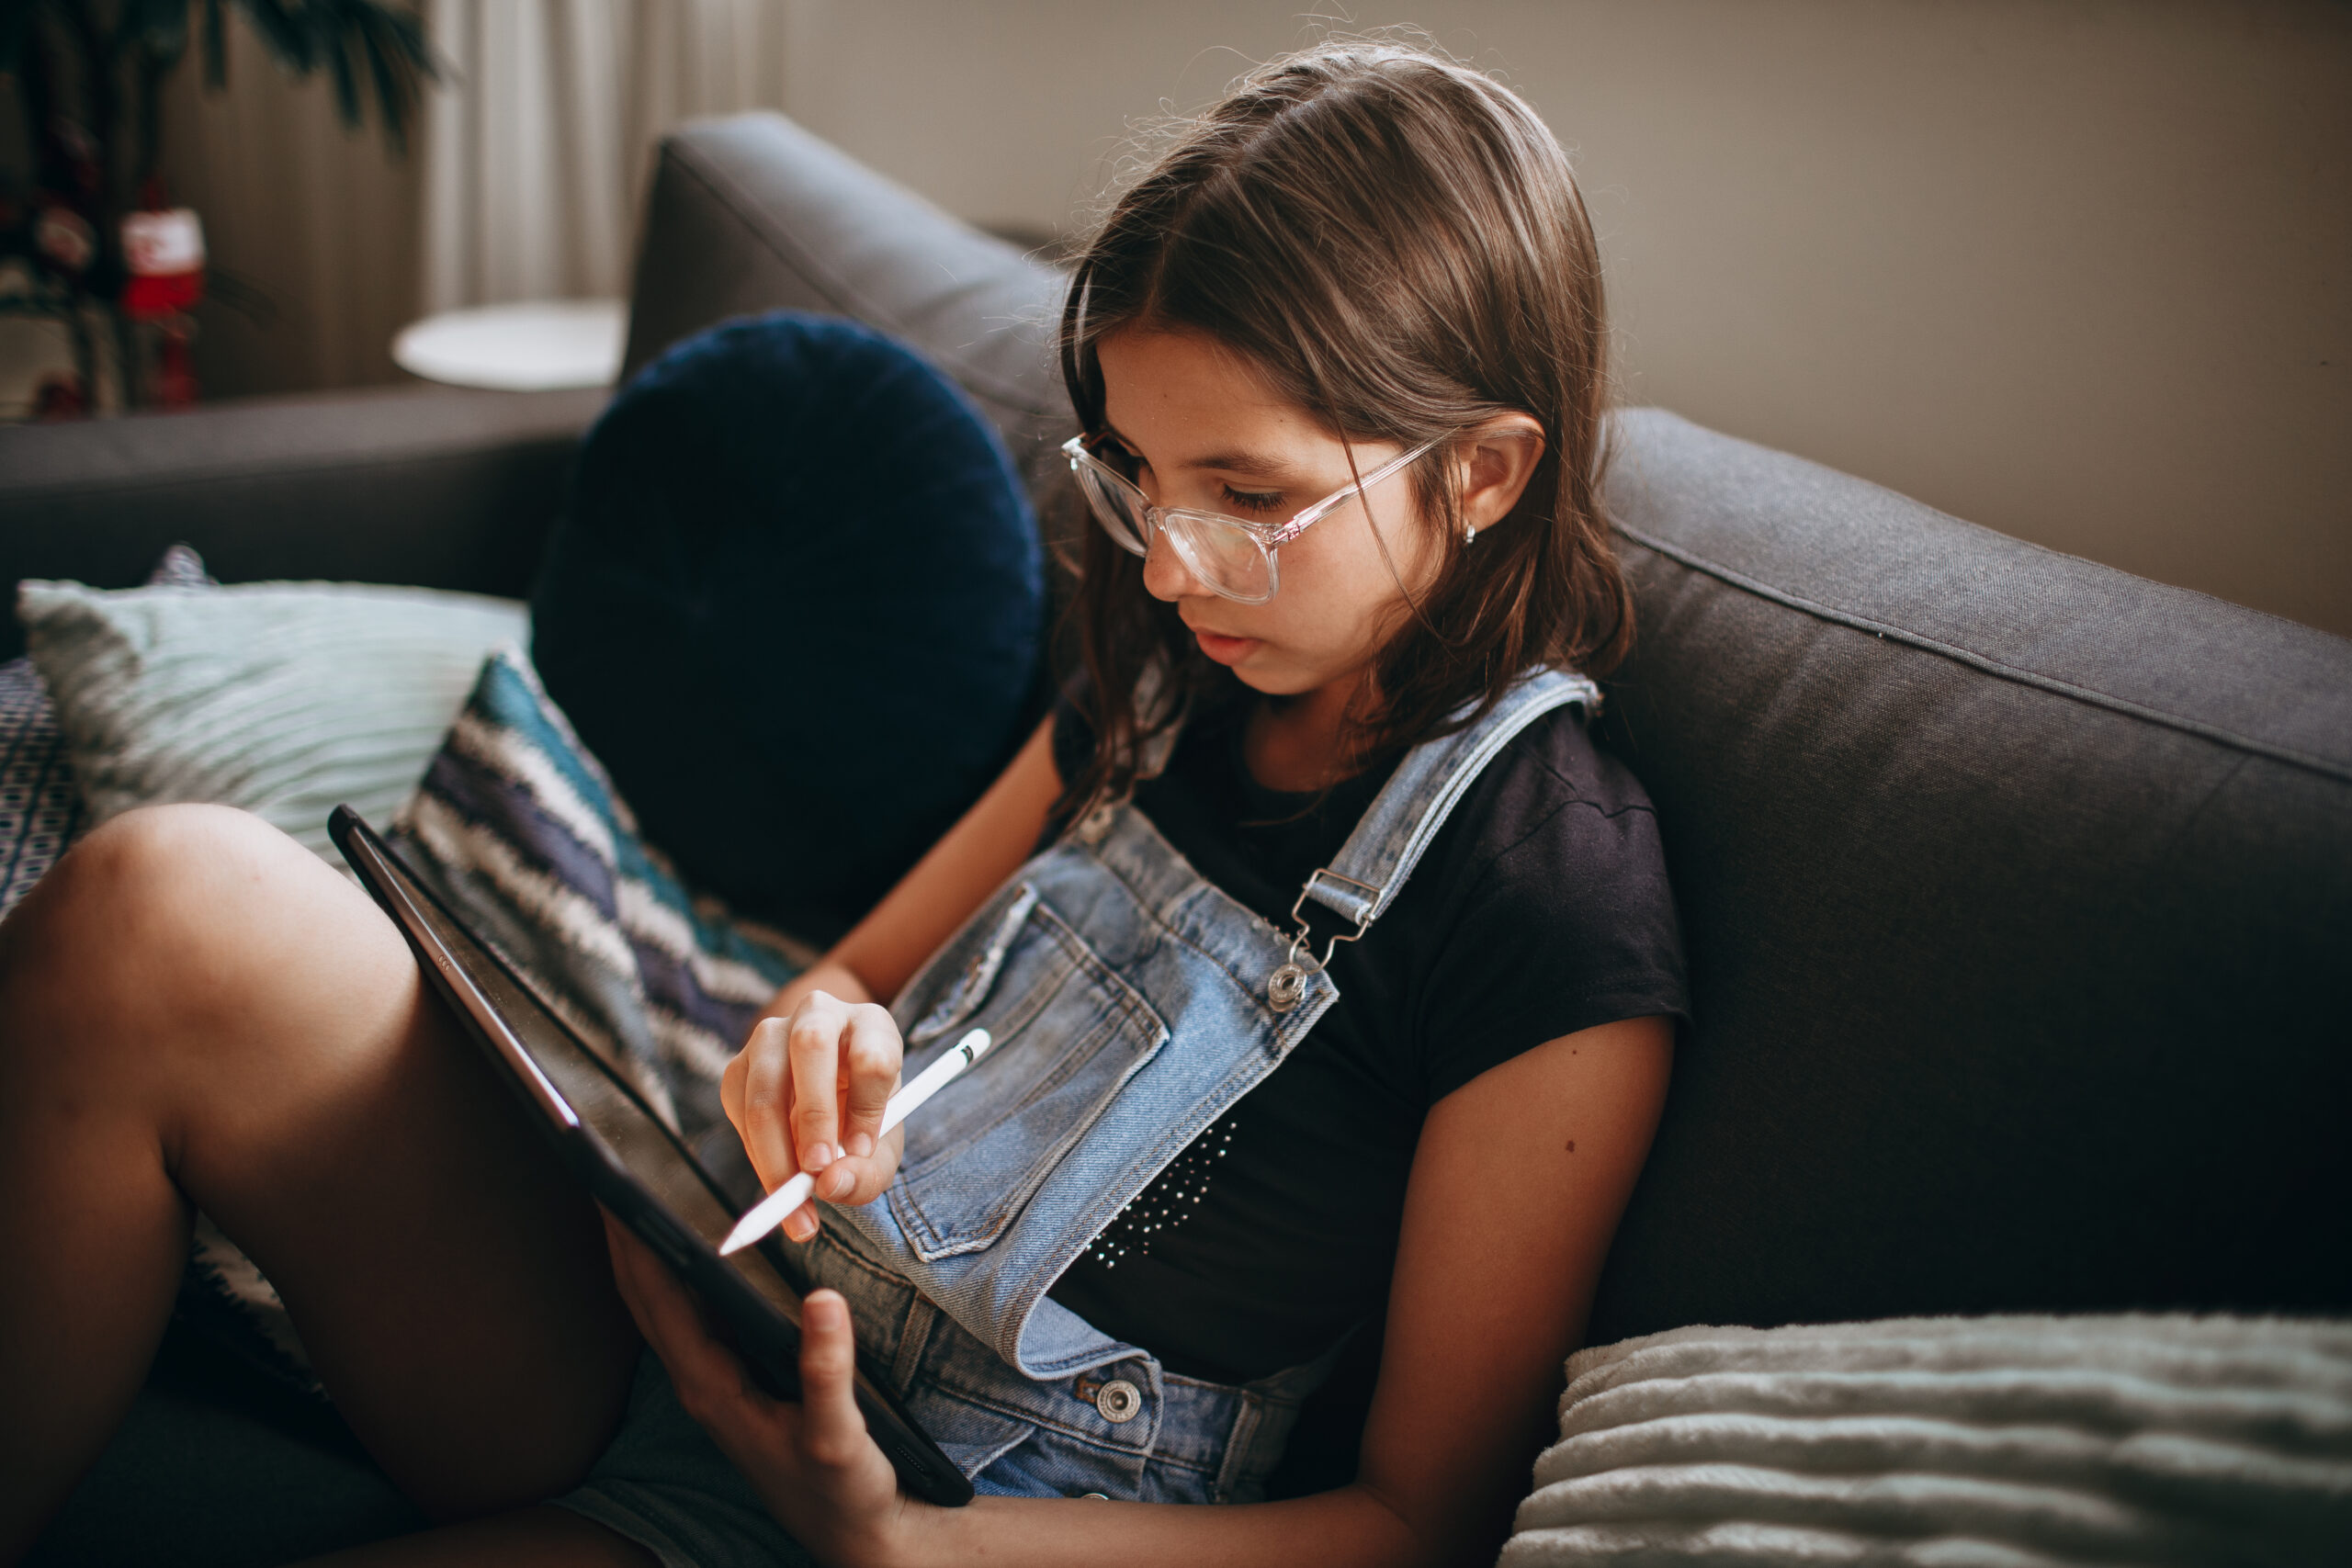 a girl wearing overalls and glasses sits on a couch and reads on a tablet screen